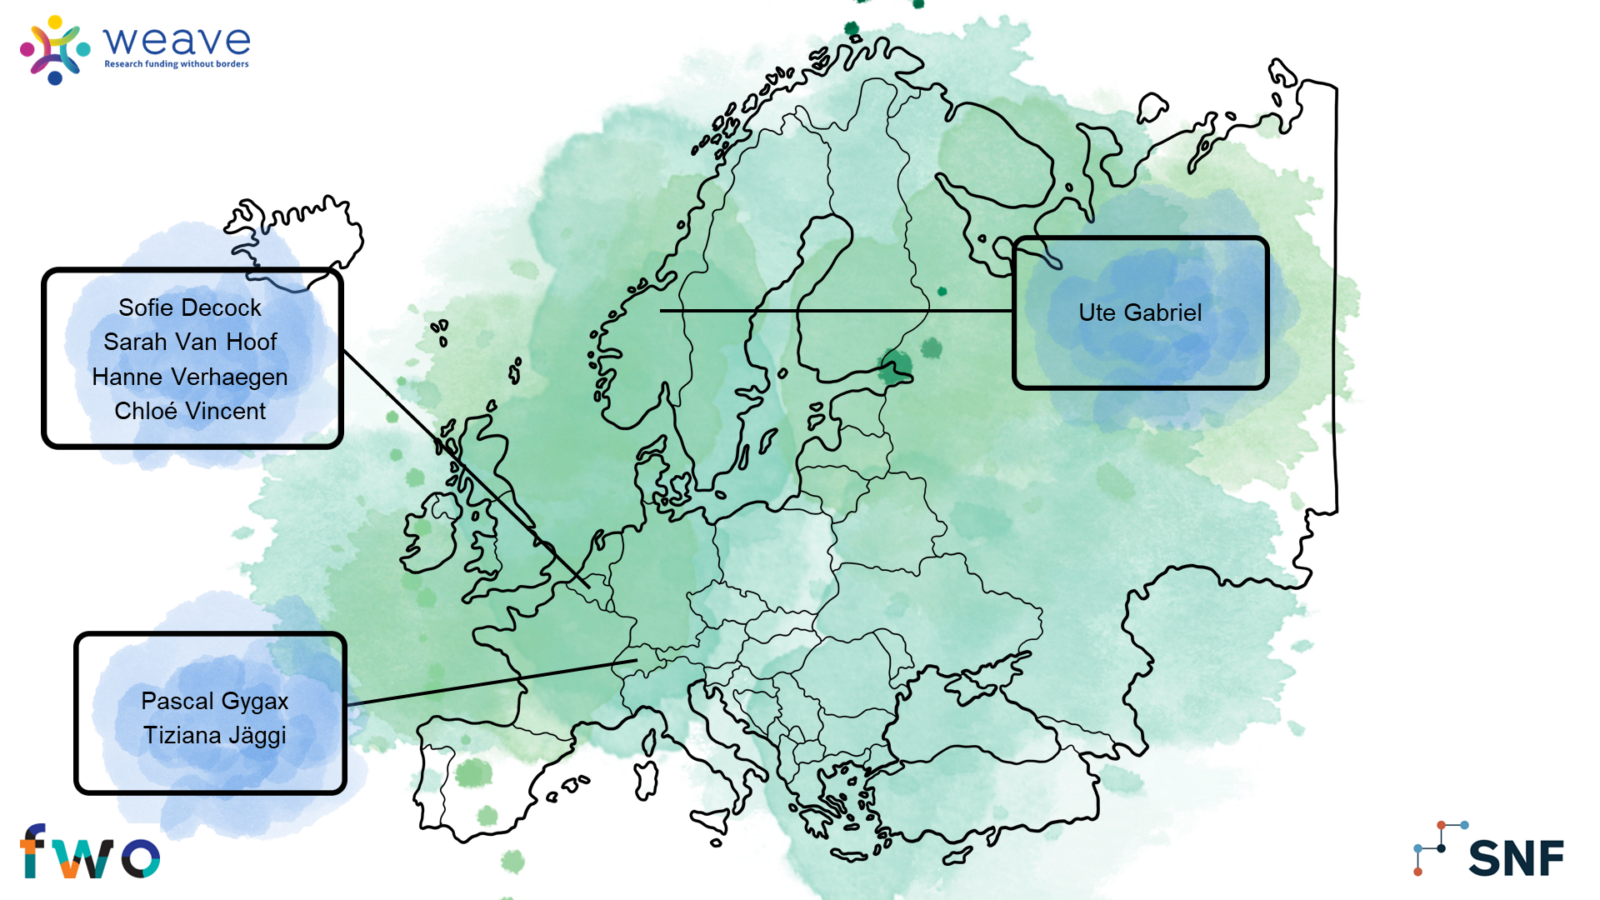 Map of Europe showing the location of the researchers in the project